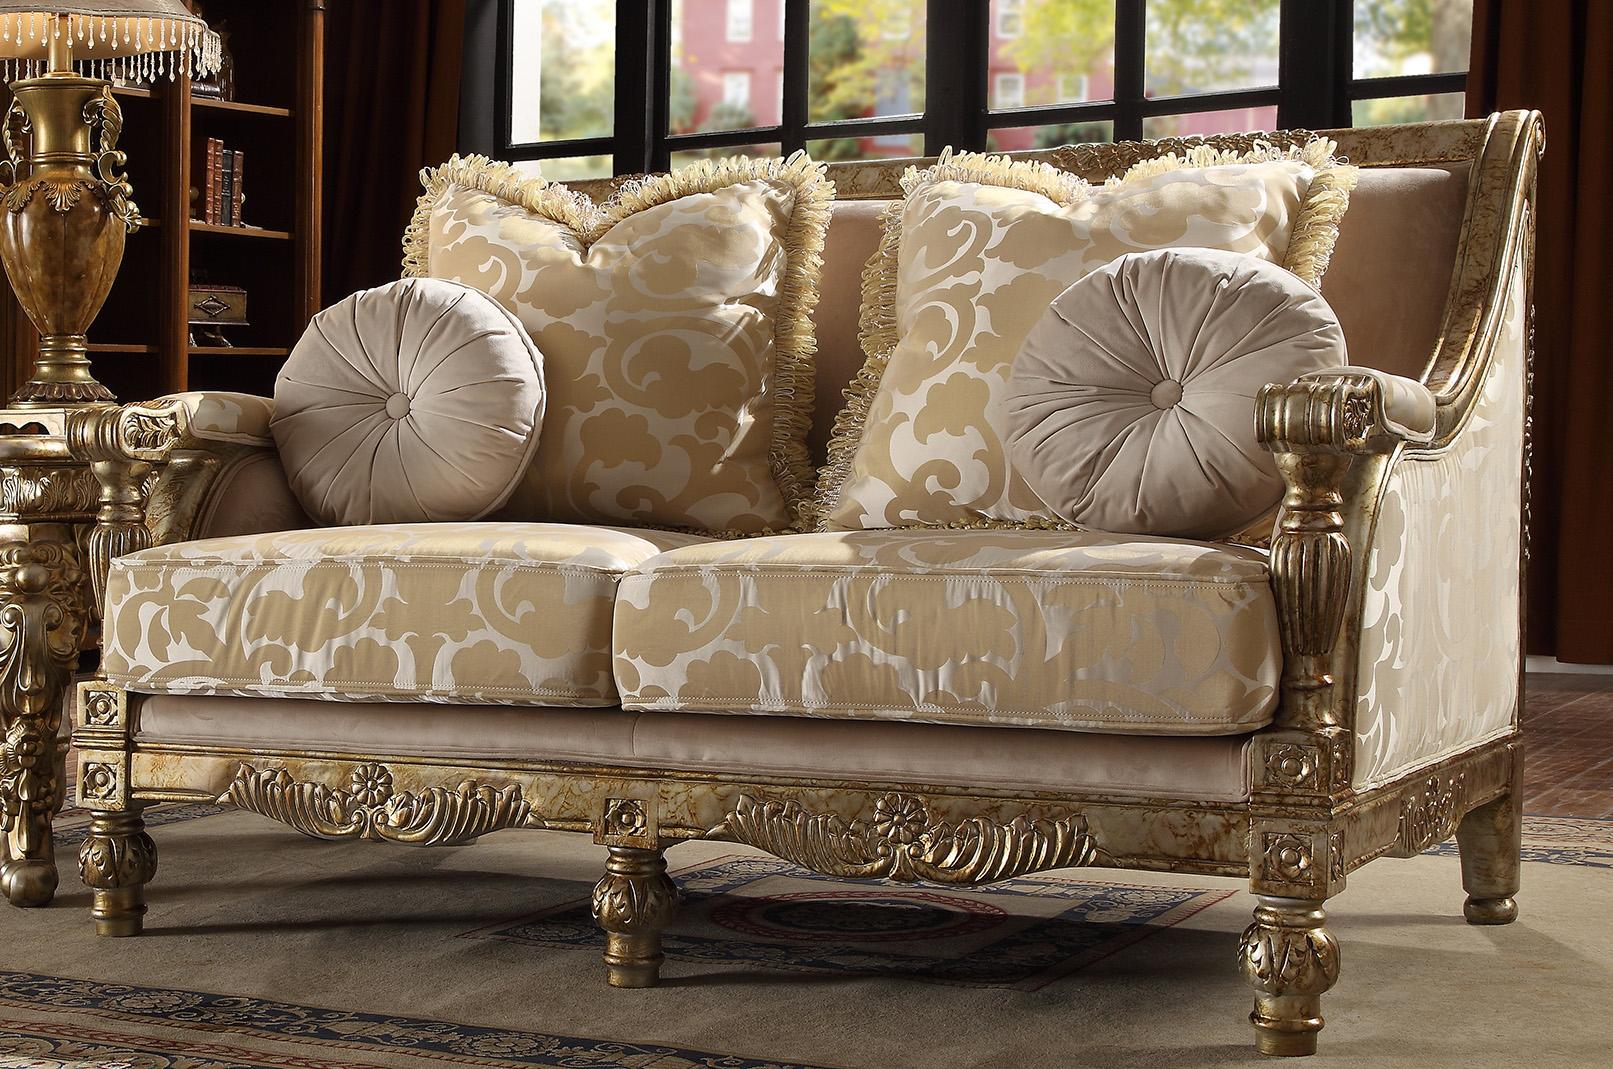 

    
Homey Design Furniture Hd-205 Sofa Loveseat Chair Coffee Table End Table Gold/Antique HD-205 Set-7
